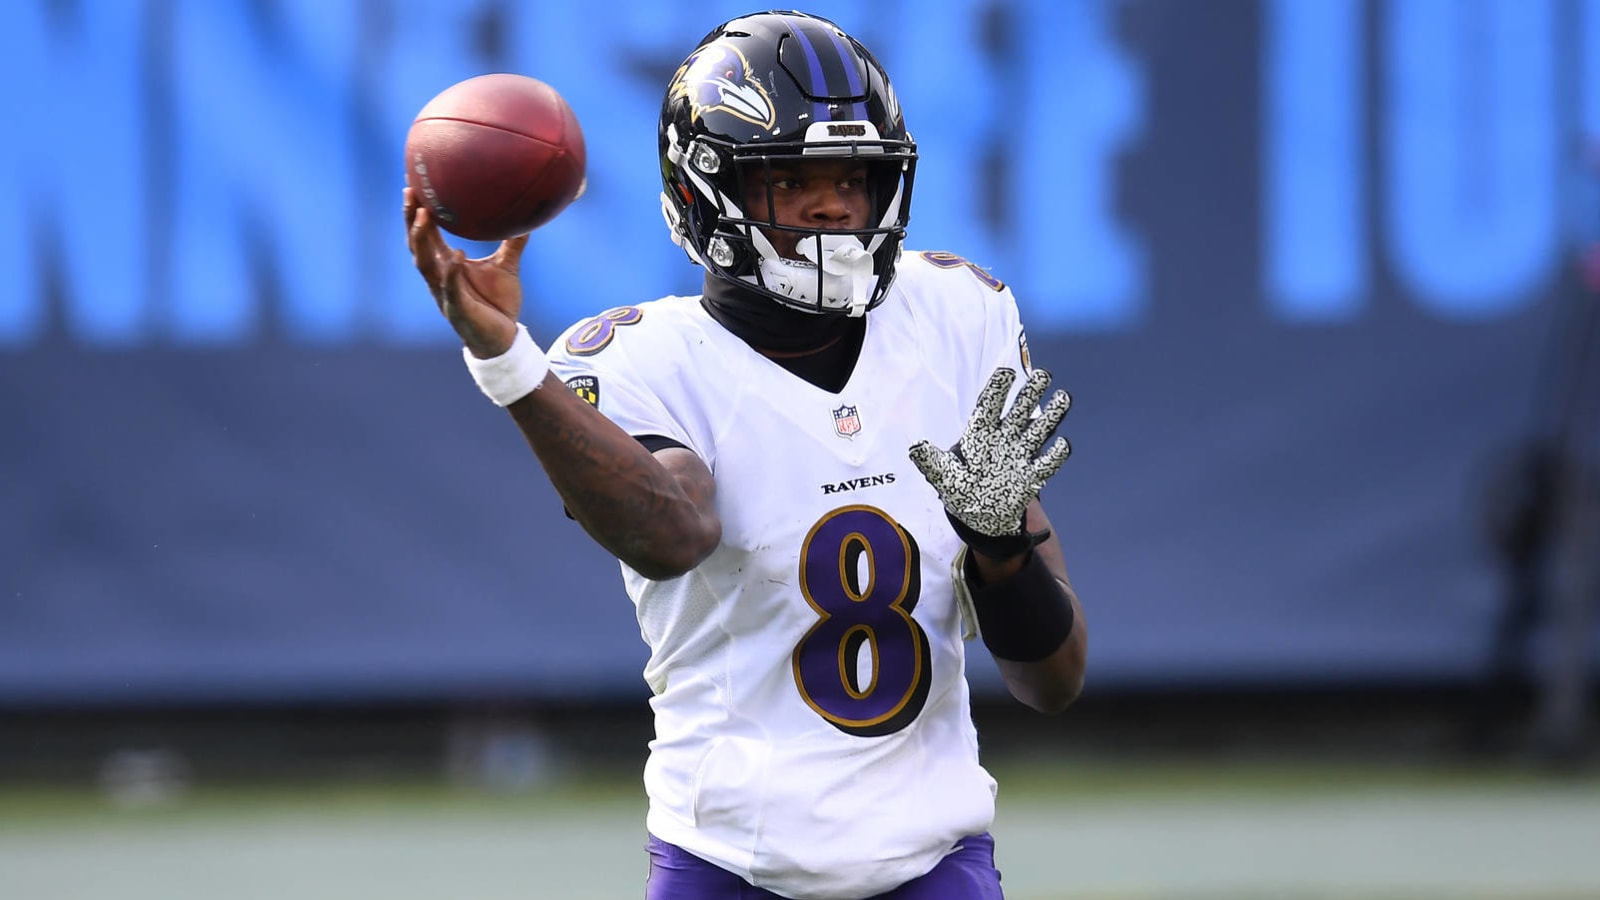 Why Ravens should sign Jackson to long-term deal this year